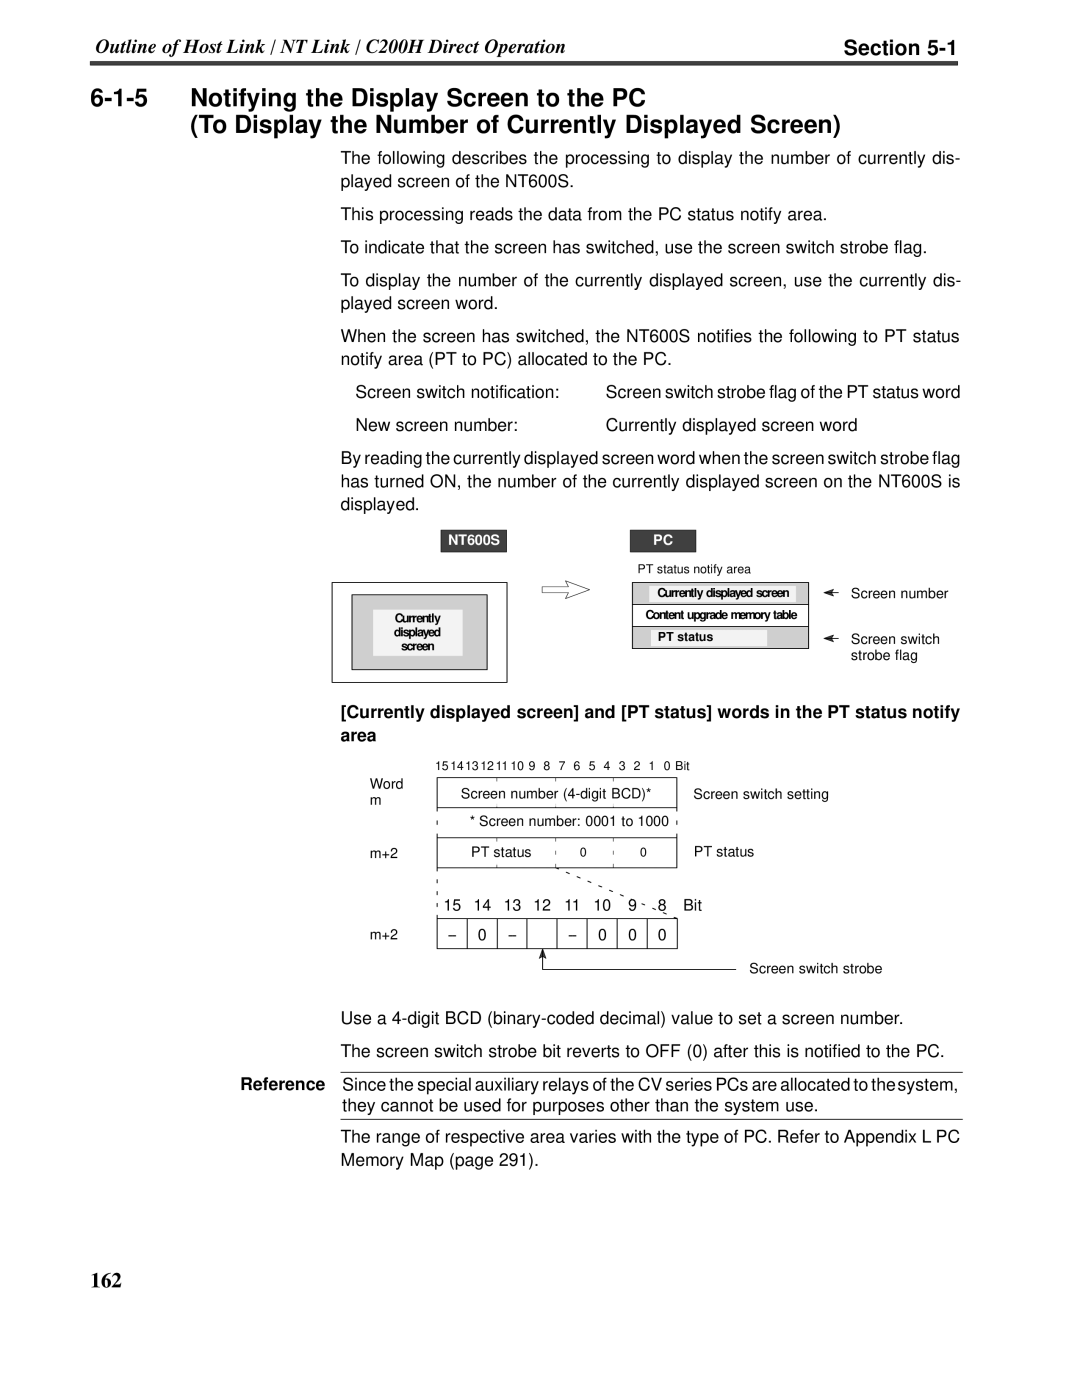 Omron V022-E3-1 operation manual 6-1-5Notifying the Display Screen to the PC, 00, Section 